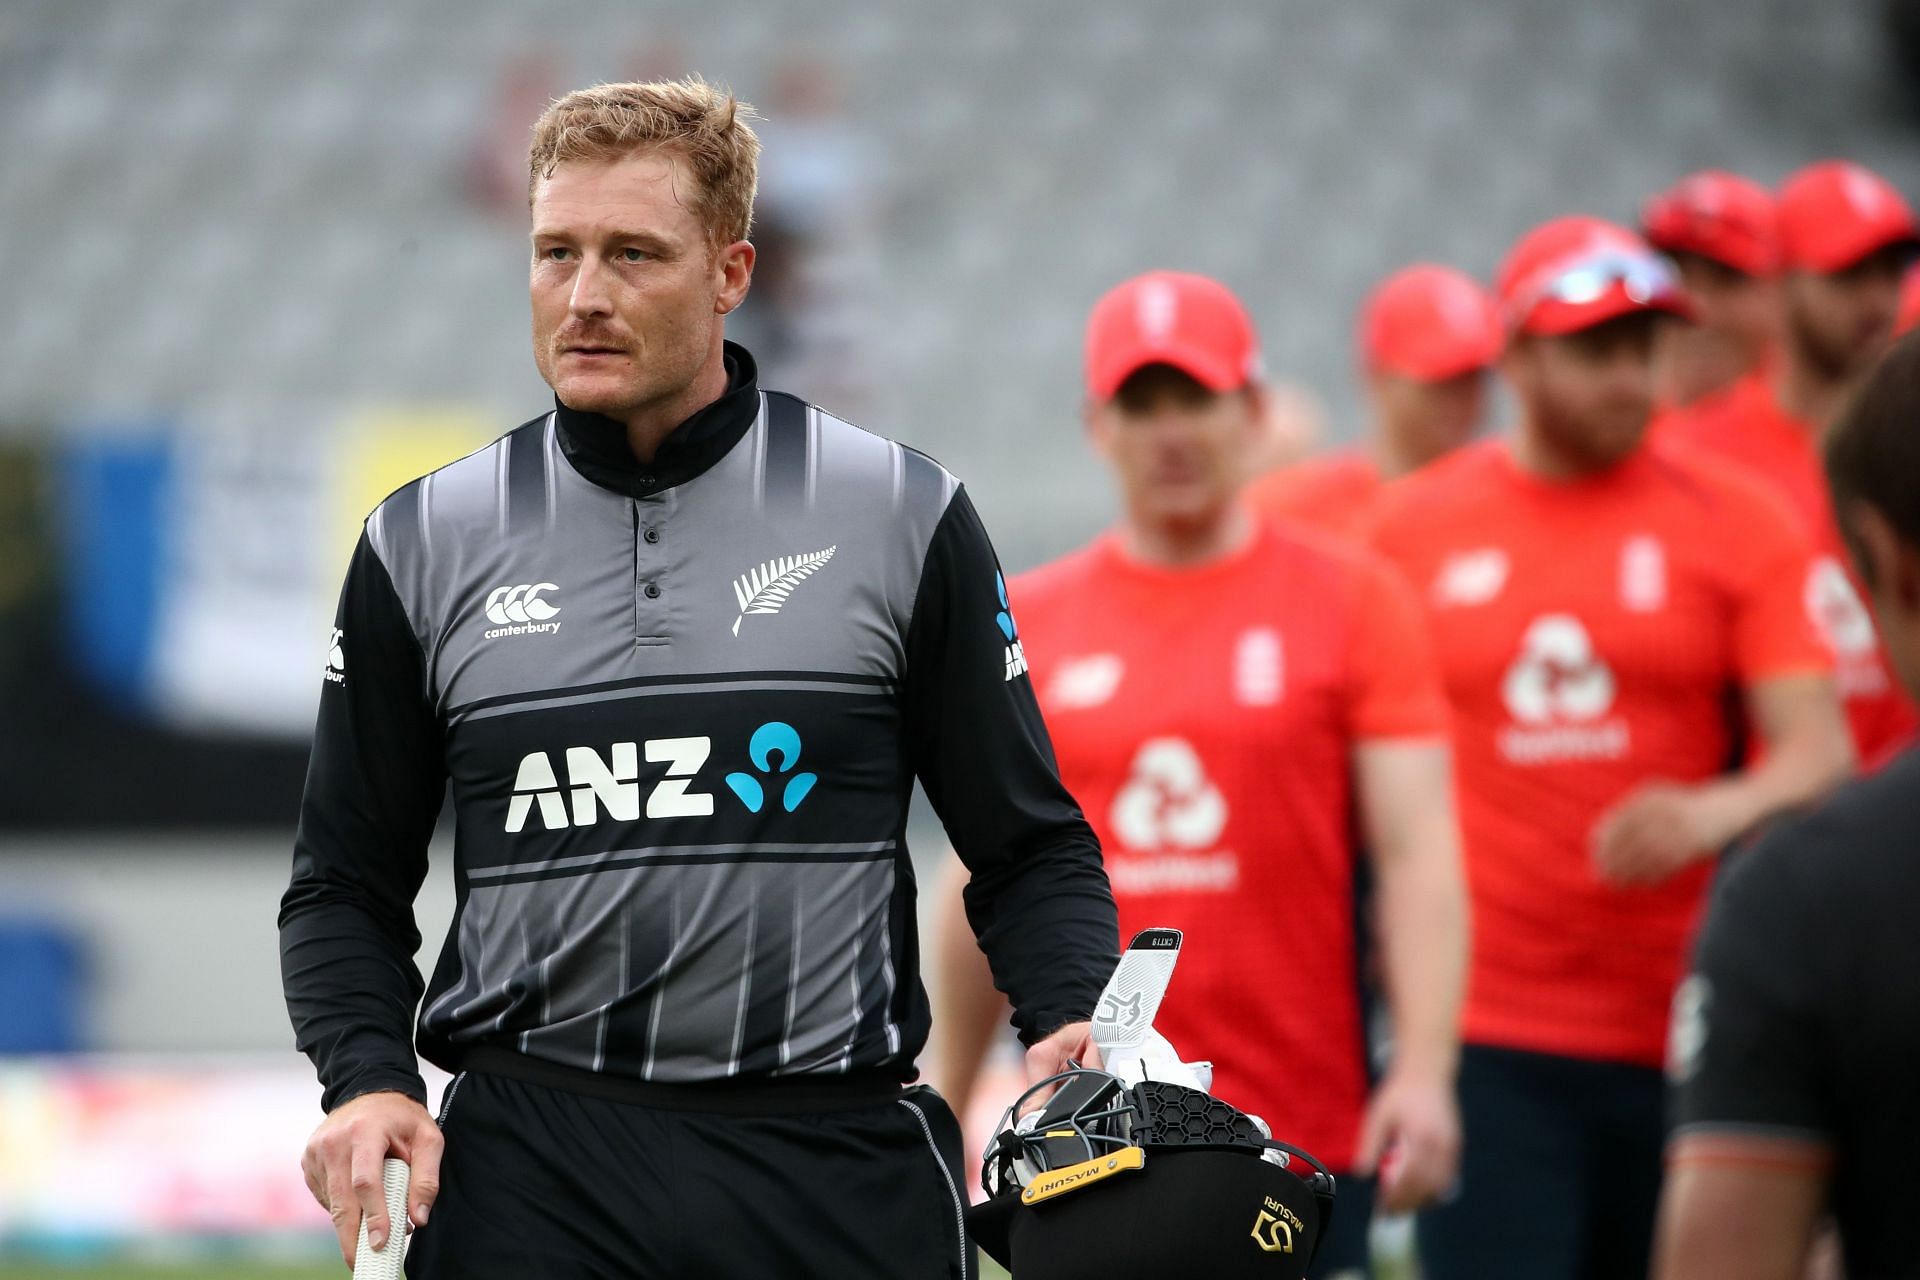 New Zealand v England - T20: Game 5 (Image: Getty)